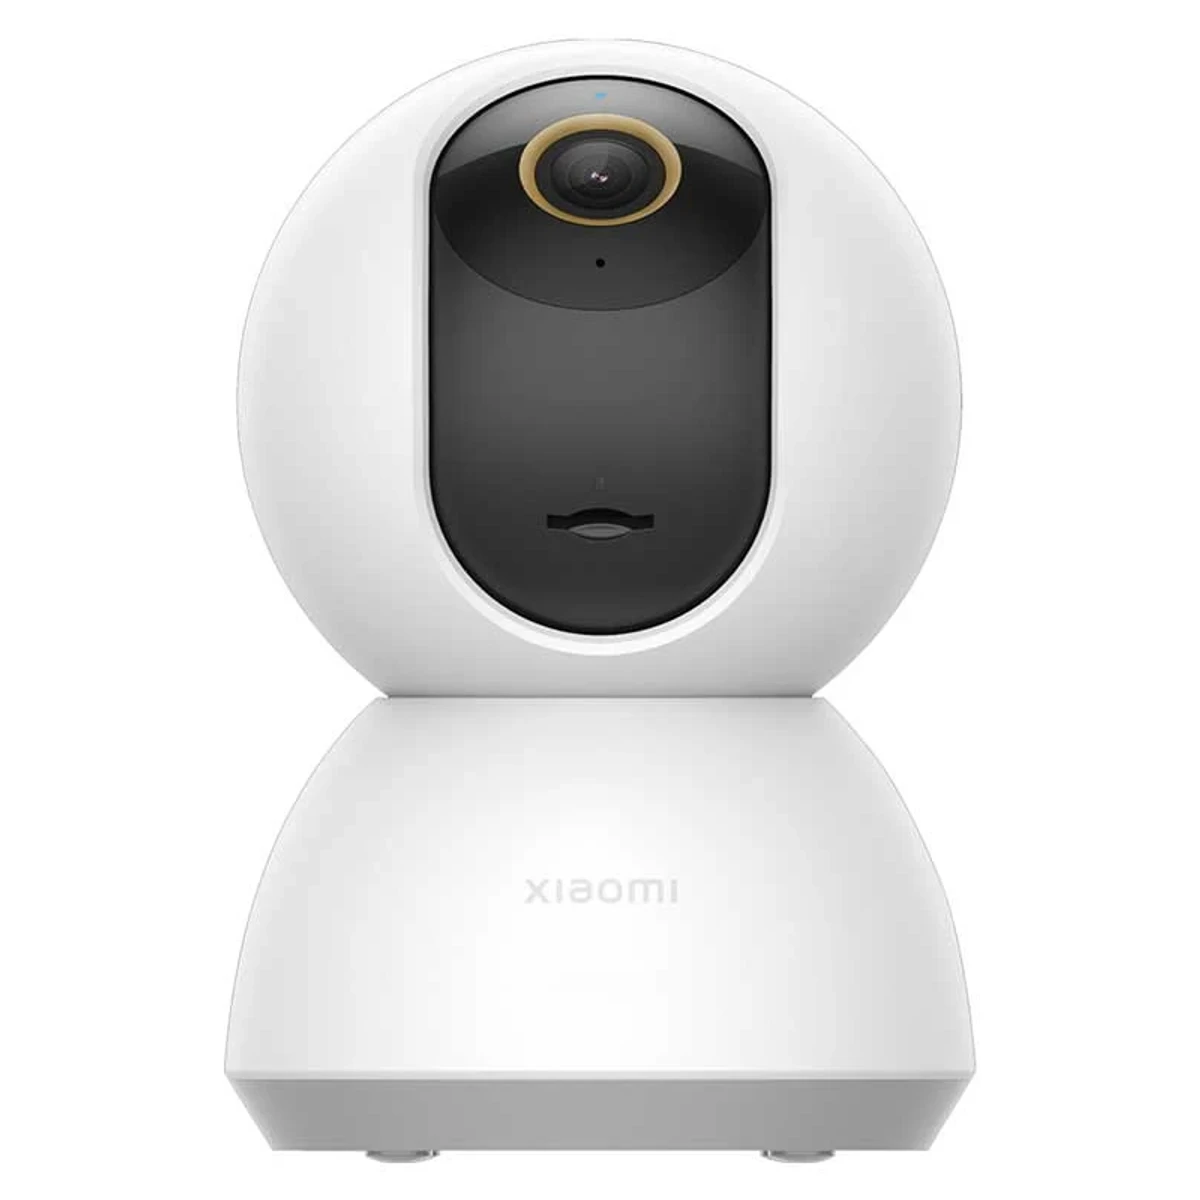 Xiaomi C300 360 Degree 2K (3.0MP) White Smart Home Security Dome Wi-Fi IP Camera XMC01 (without Adapter)